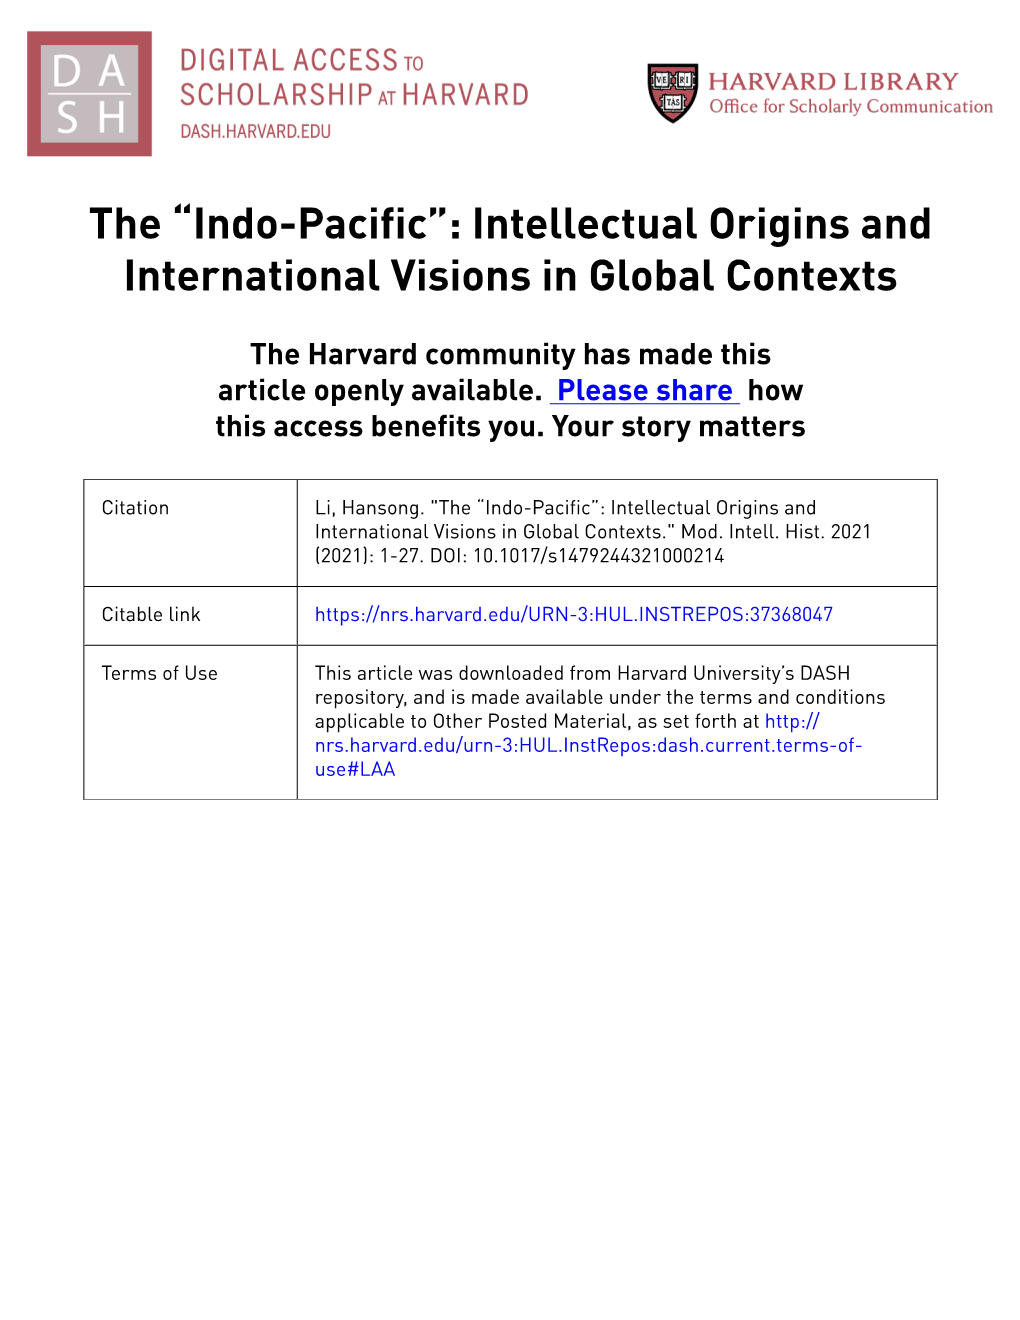 Indo-Pacific”: Intellectual Origins and International Visions in Global Contexts